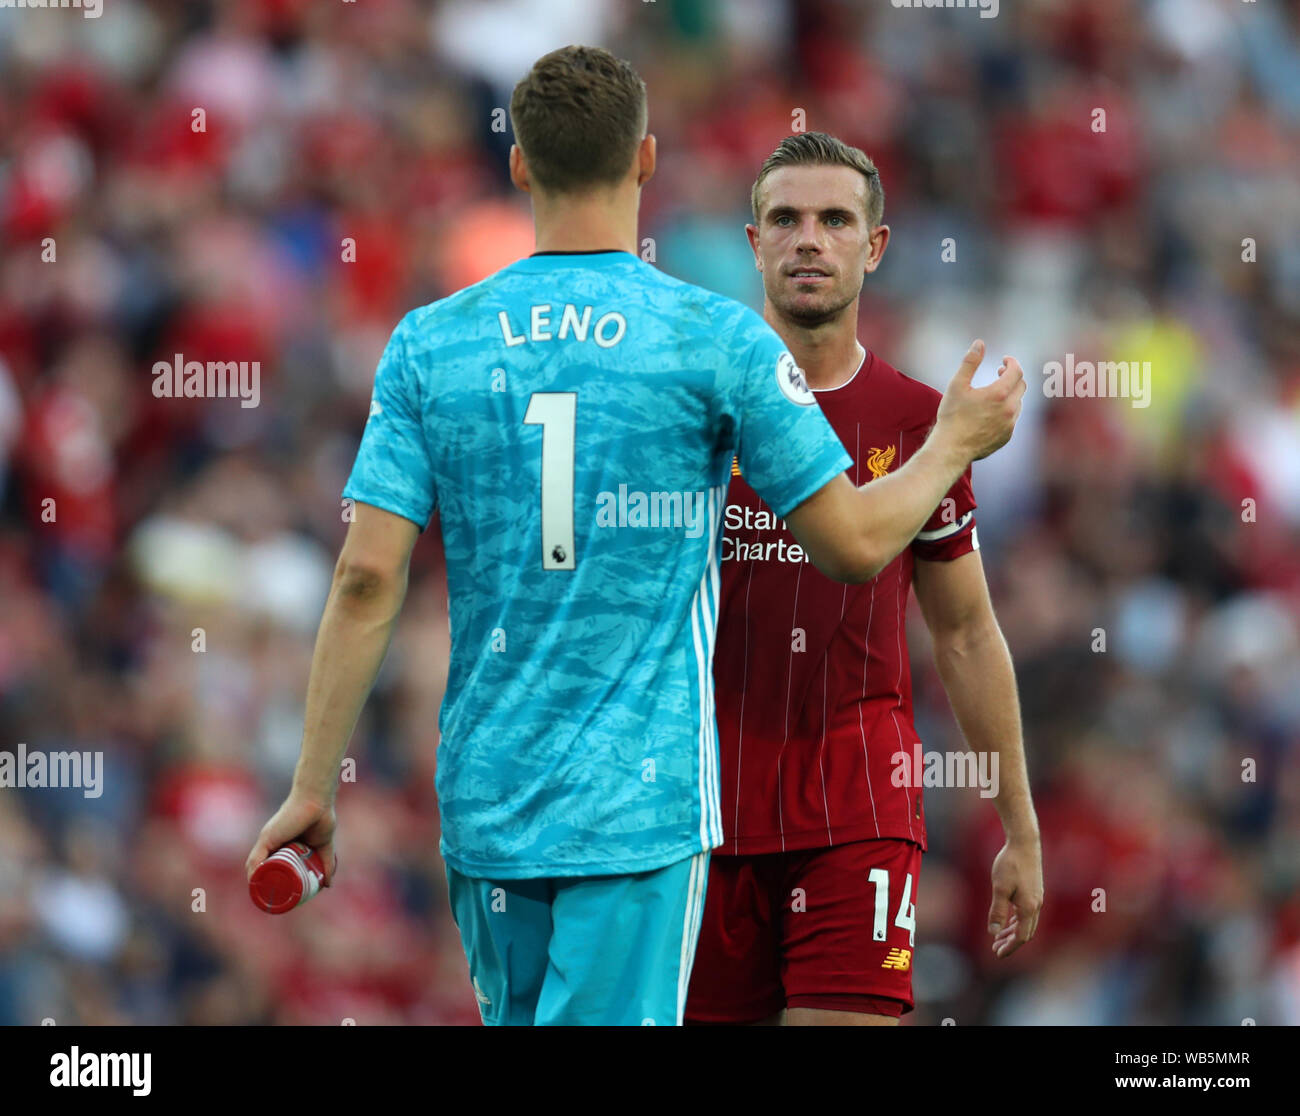 24th August 2019; Anfield, Liverpool, Merseyside, England; English Premier League Football, Liverpool versus Arsenal Football Club; Jordan Henderson of Liverpool shakes hands with Arsenal goalkeeper Bernd Leno after the final whistle - Strictly Editorial Use Only. No use with unauthorized audio, video, data, fixture lists, club/league logos or 'live' services. Online in-match use limited to 120 images, no video emulation. No use in betting, games or single club/league/player publications - Strictly Editorial Use Only. No use with unauthorized audio, video, data, fixture lists, club/league logo Stock Photo